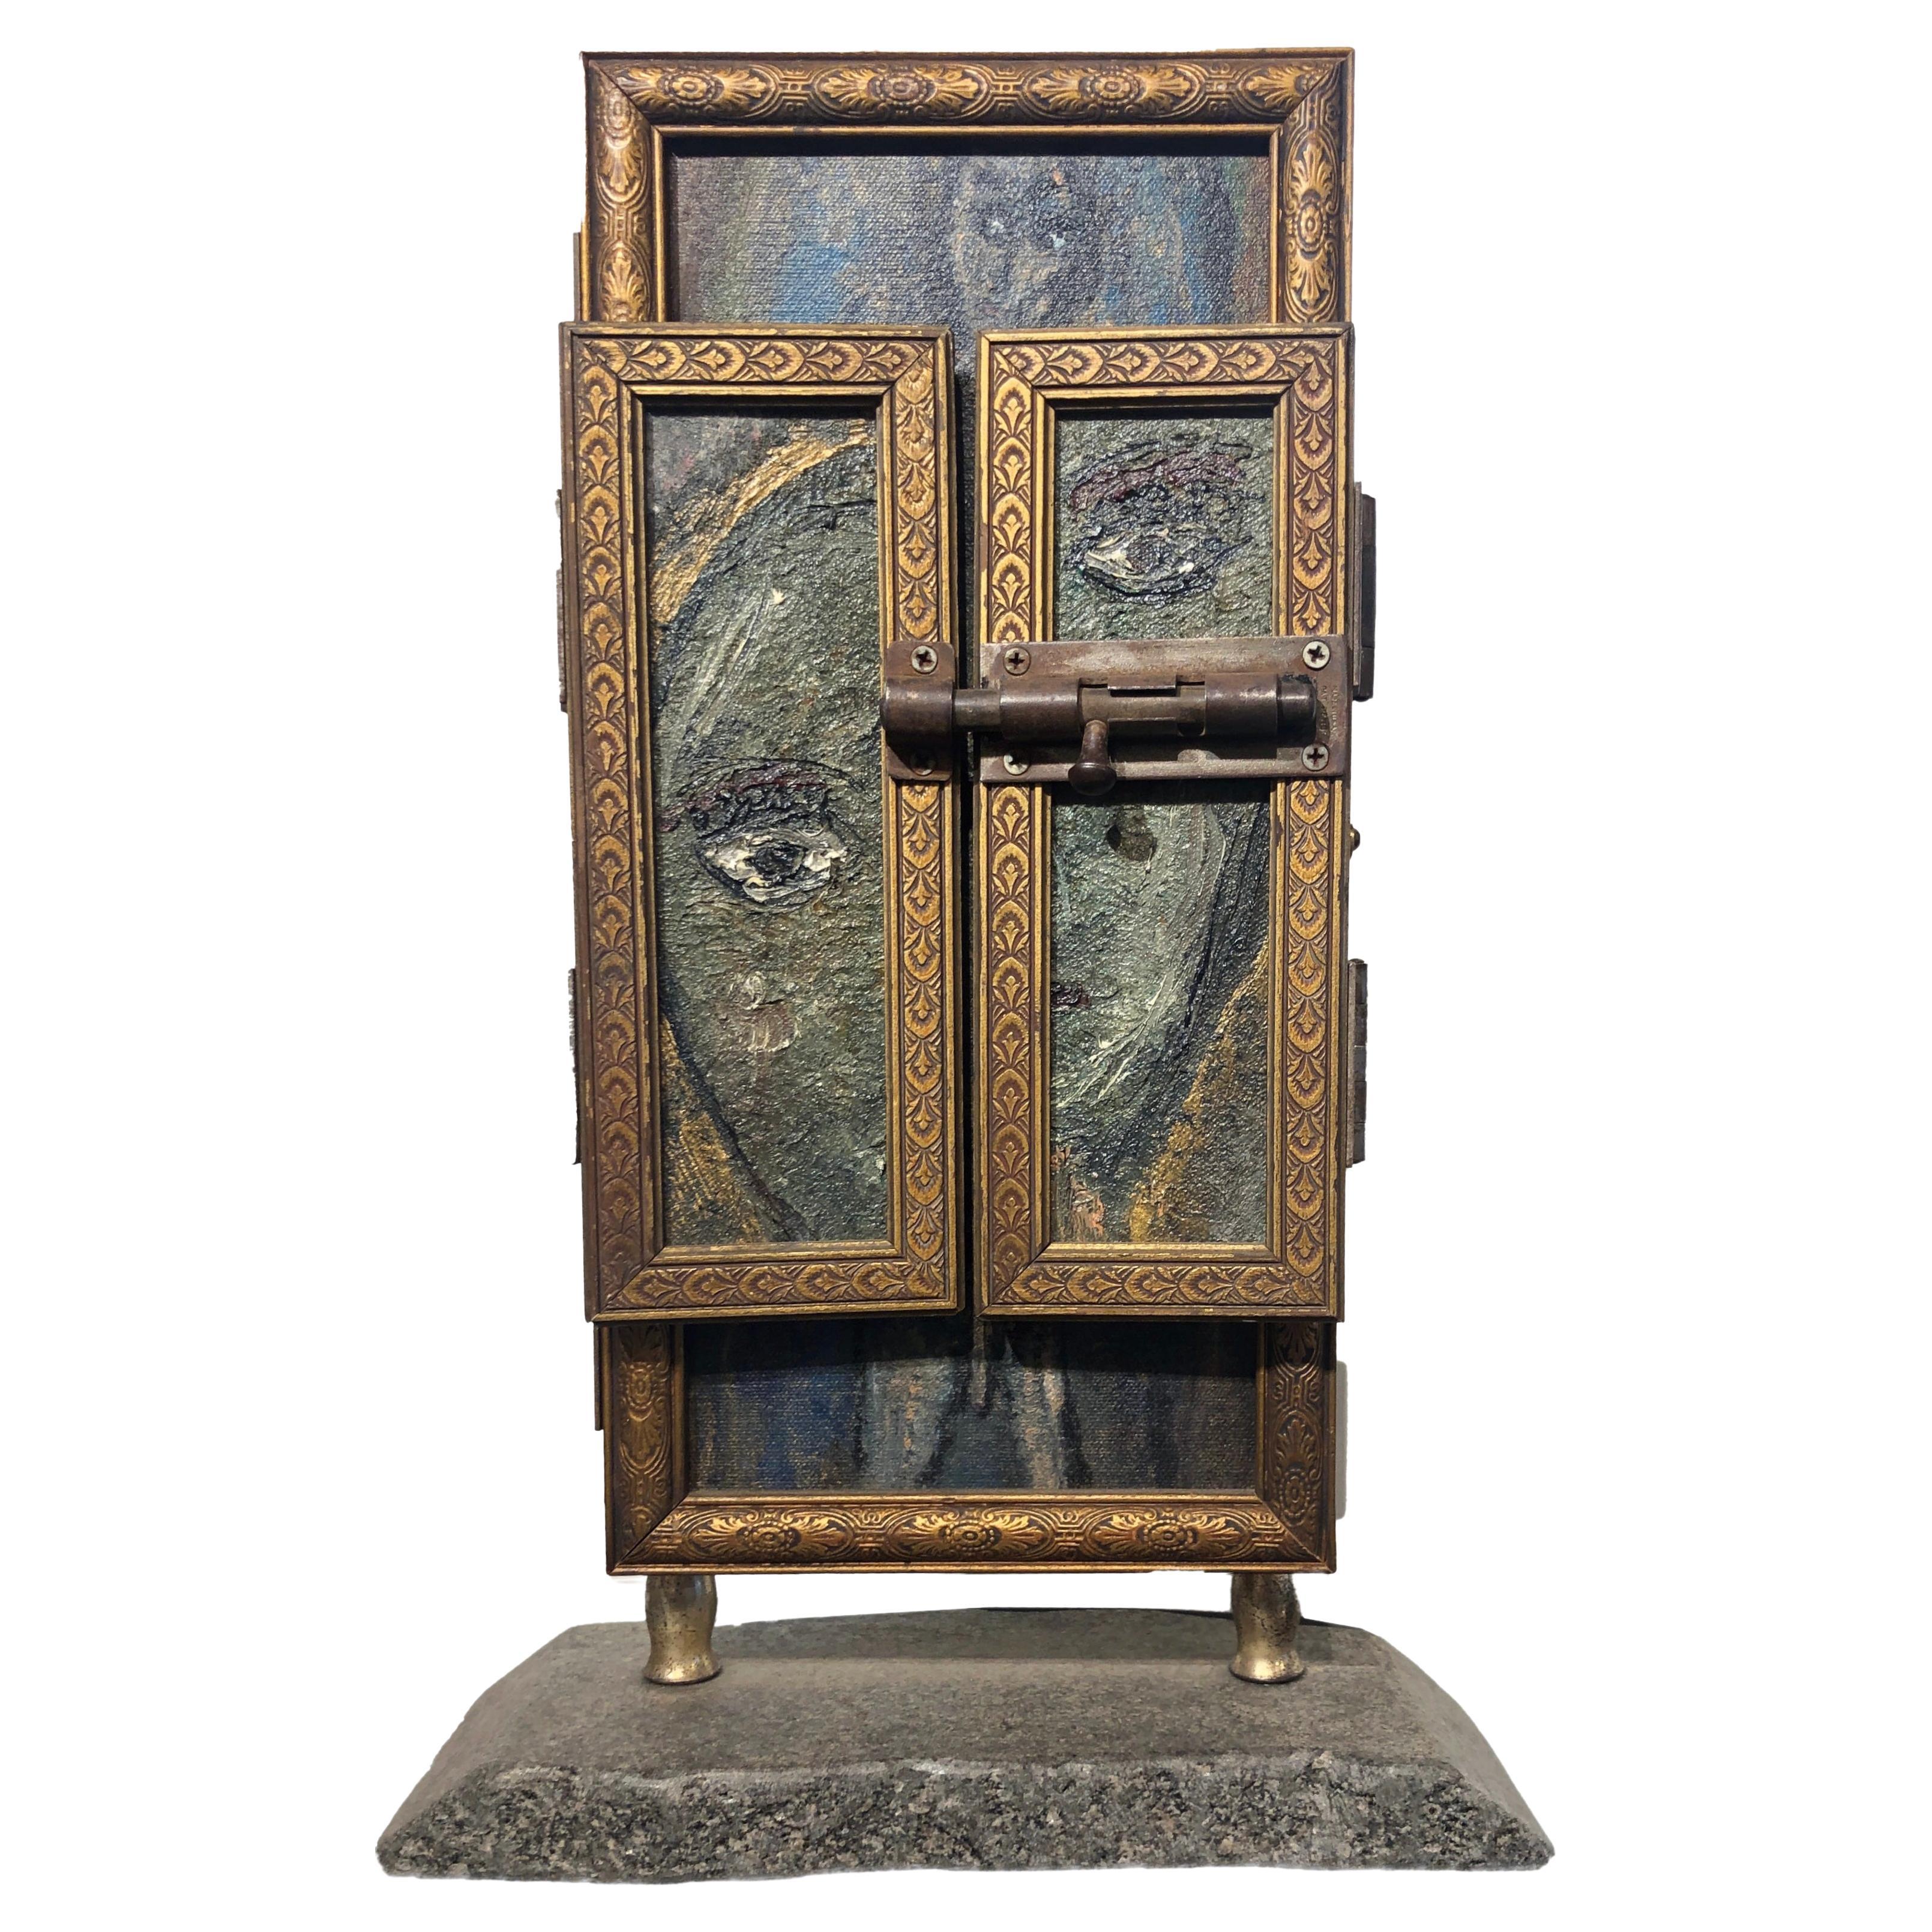 Self-taught artist John Seubert, AKA John Dolly, uses objects he uncovers as he rehabs older homes in Chicago. This piece has multiple paintings and collages. Each side and opened door is a different treasure to discover. The front is an antique